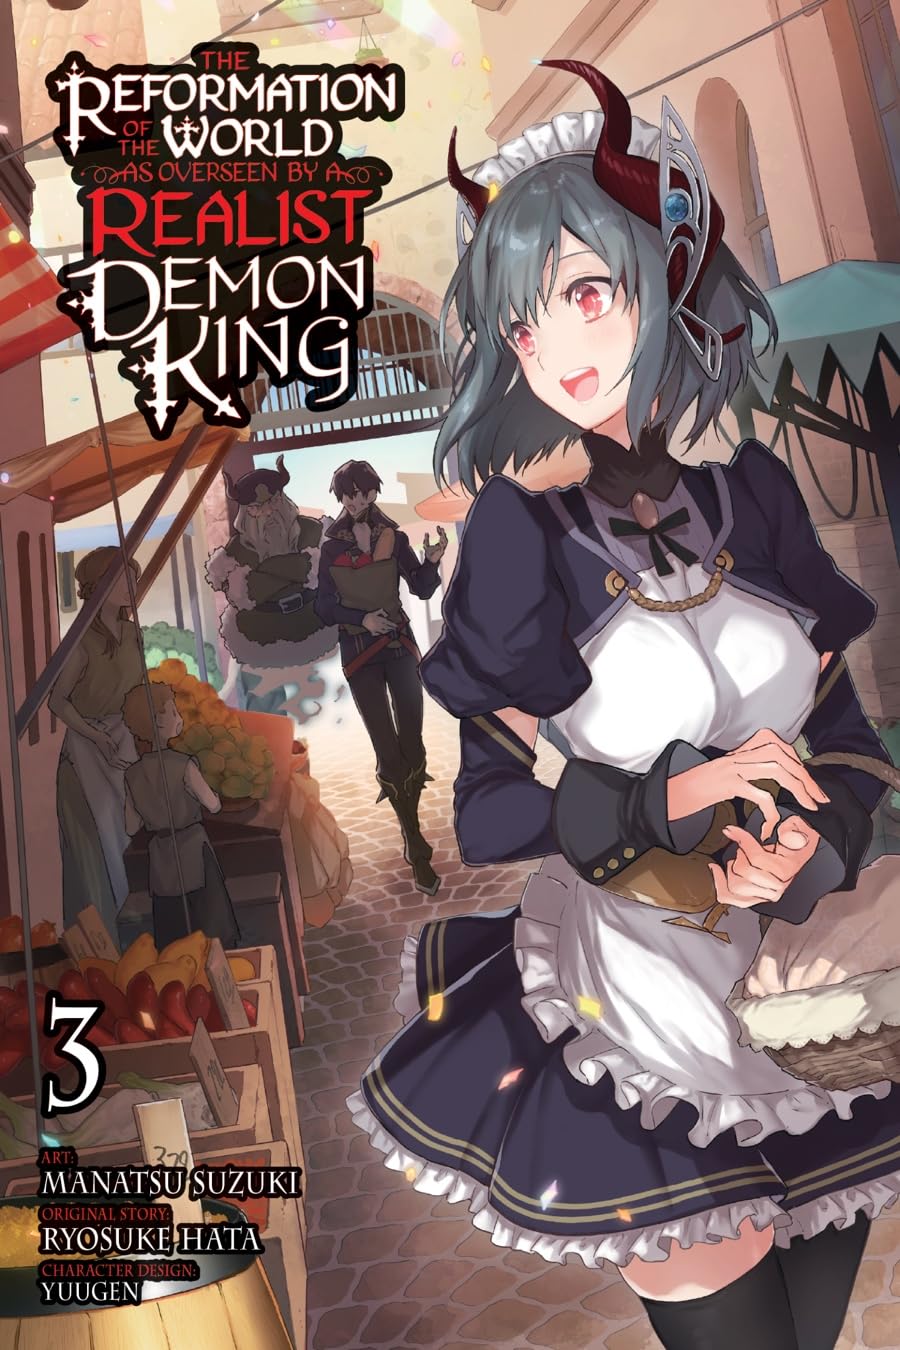 The Reformation of the World as Overseen by a Realist Demon King Vol. 03